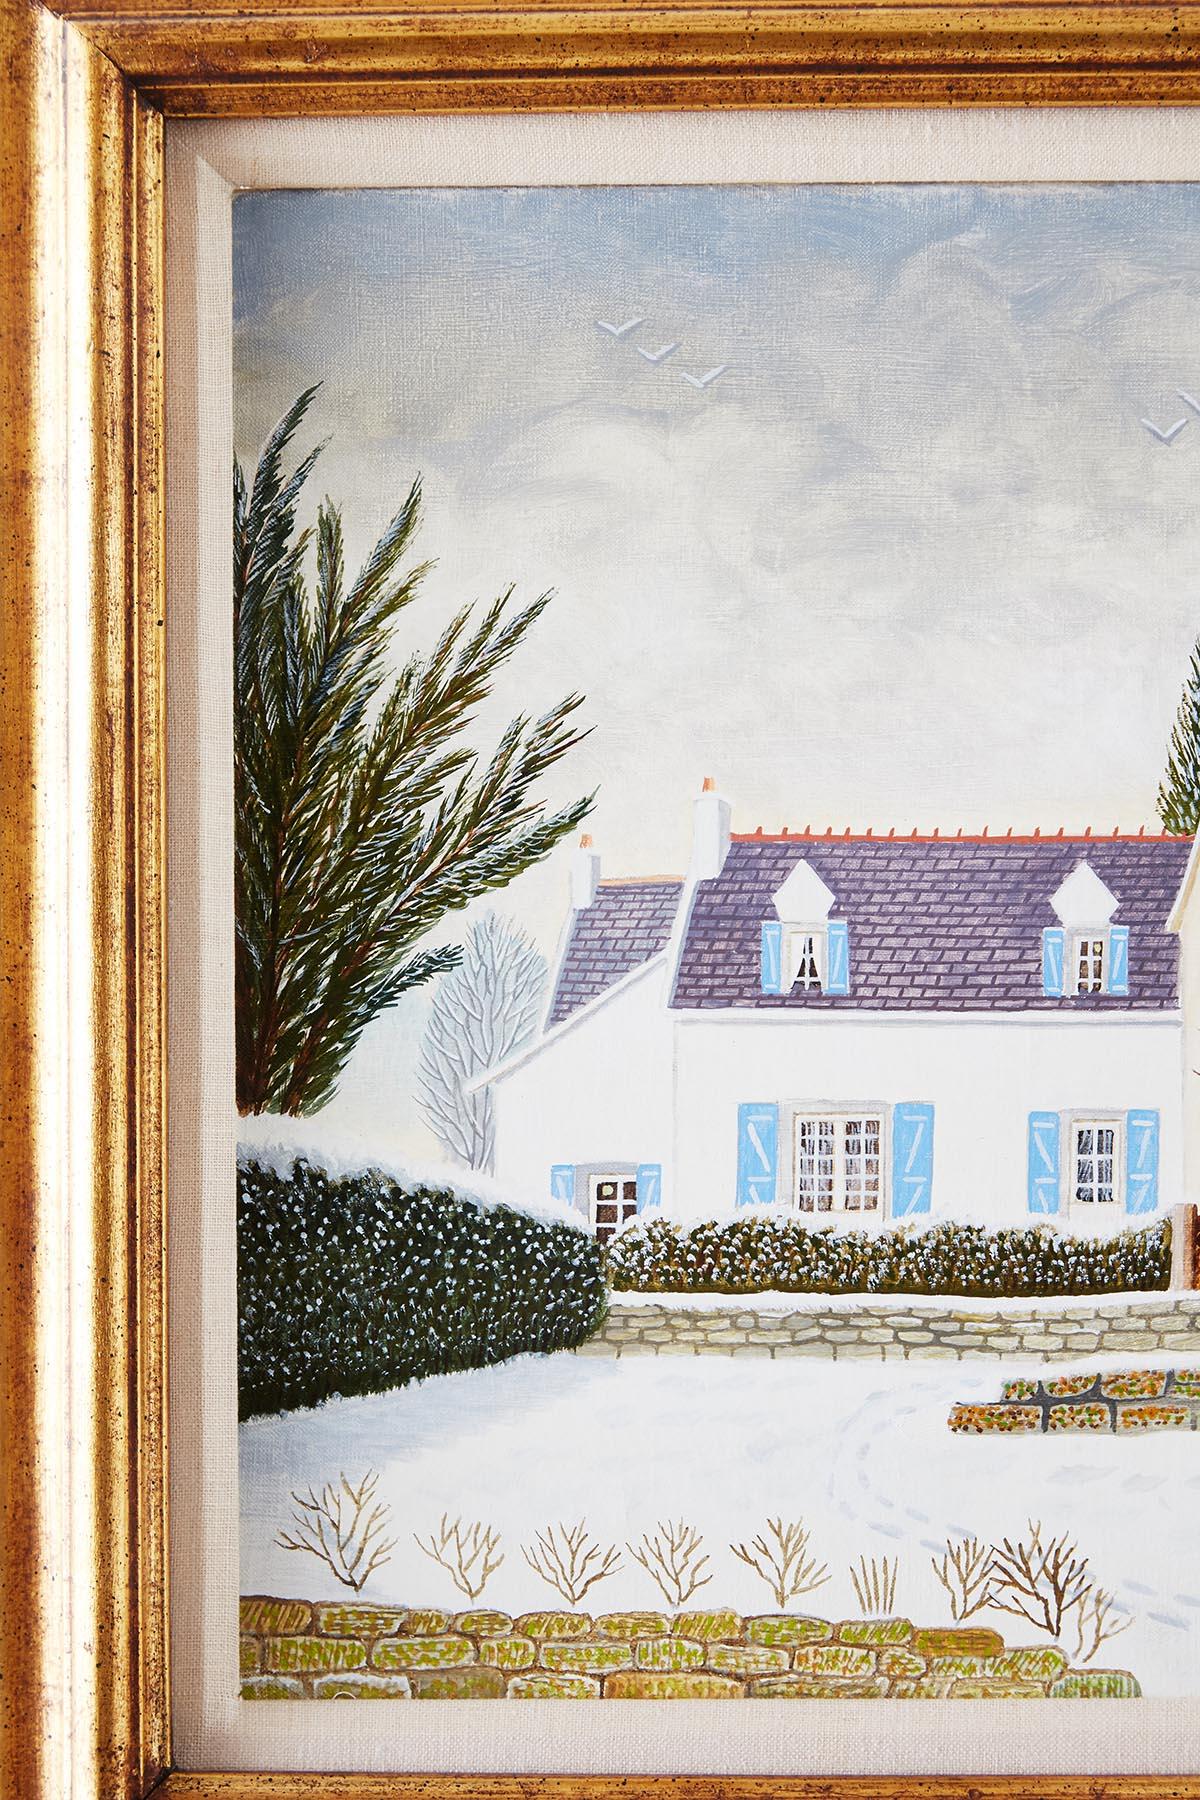 House With Snow Oil on Canvas - Beige Figurative Painting by André Bouquet.